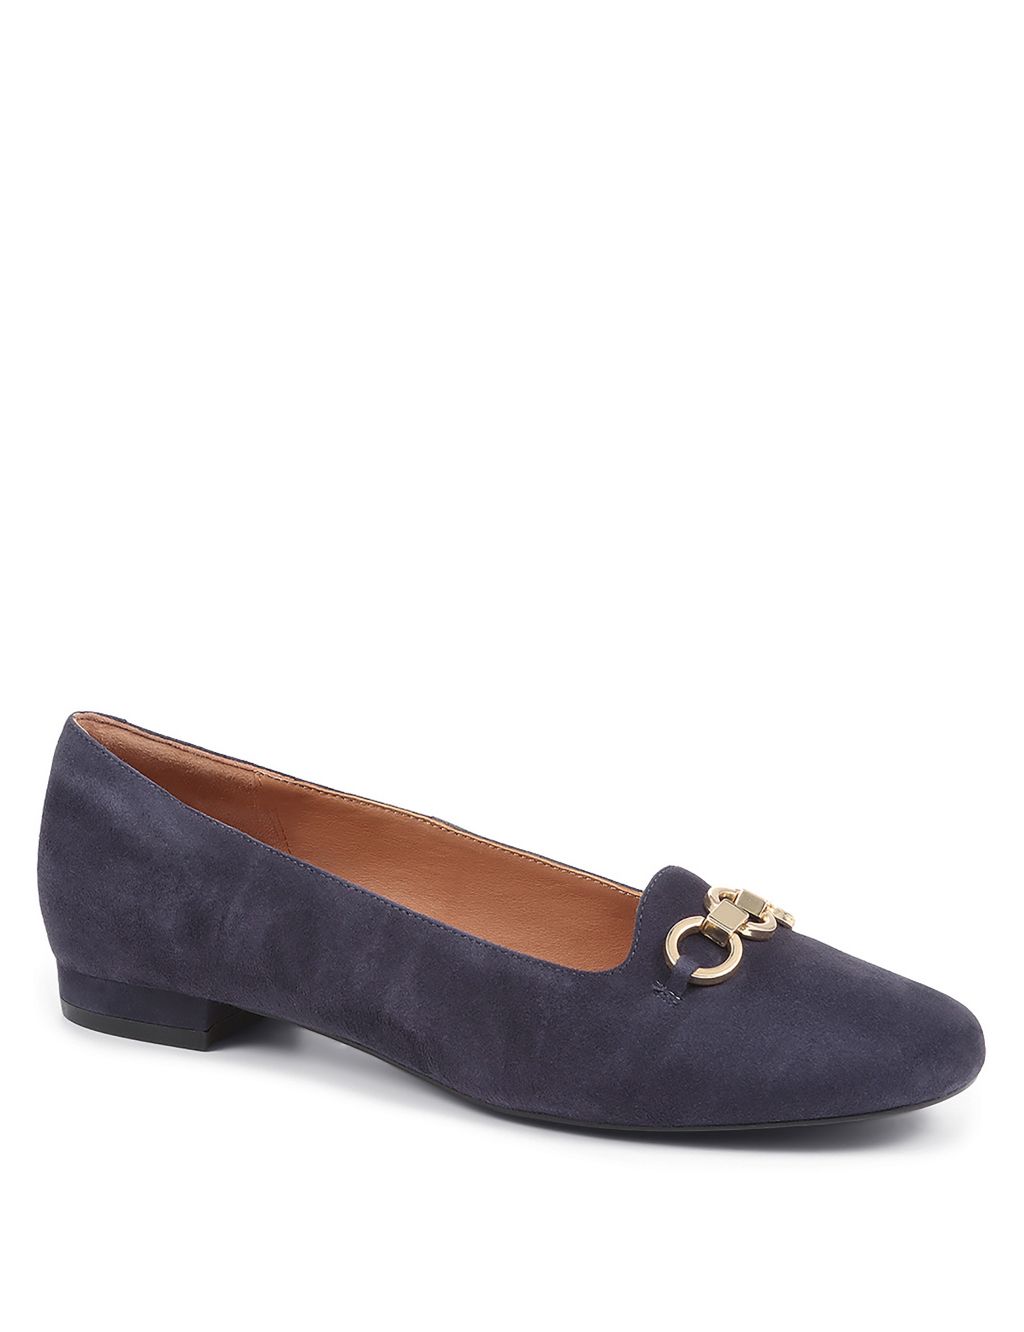 Suede Buckle Flat Loafers image 2